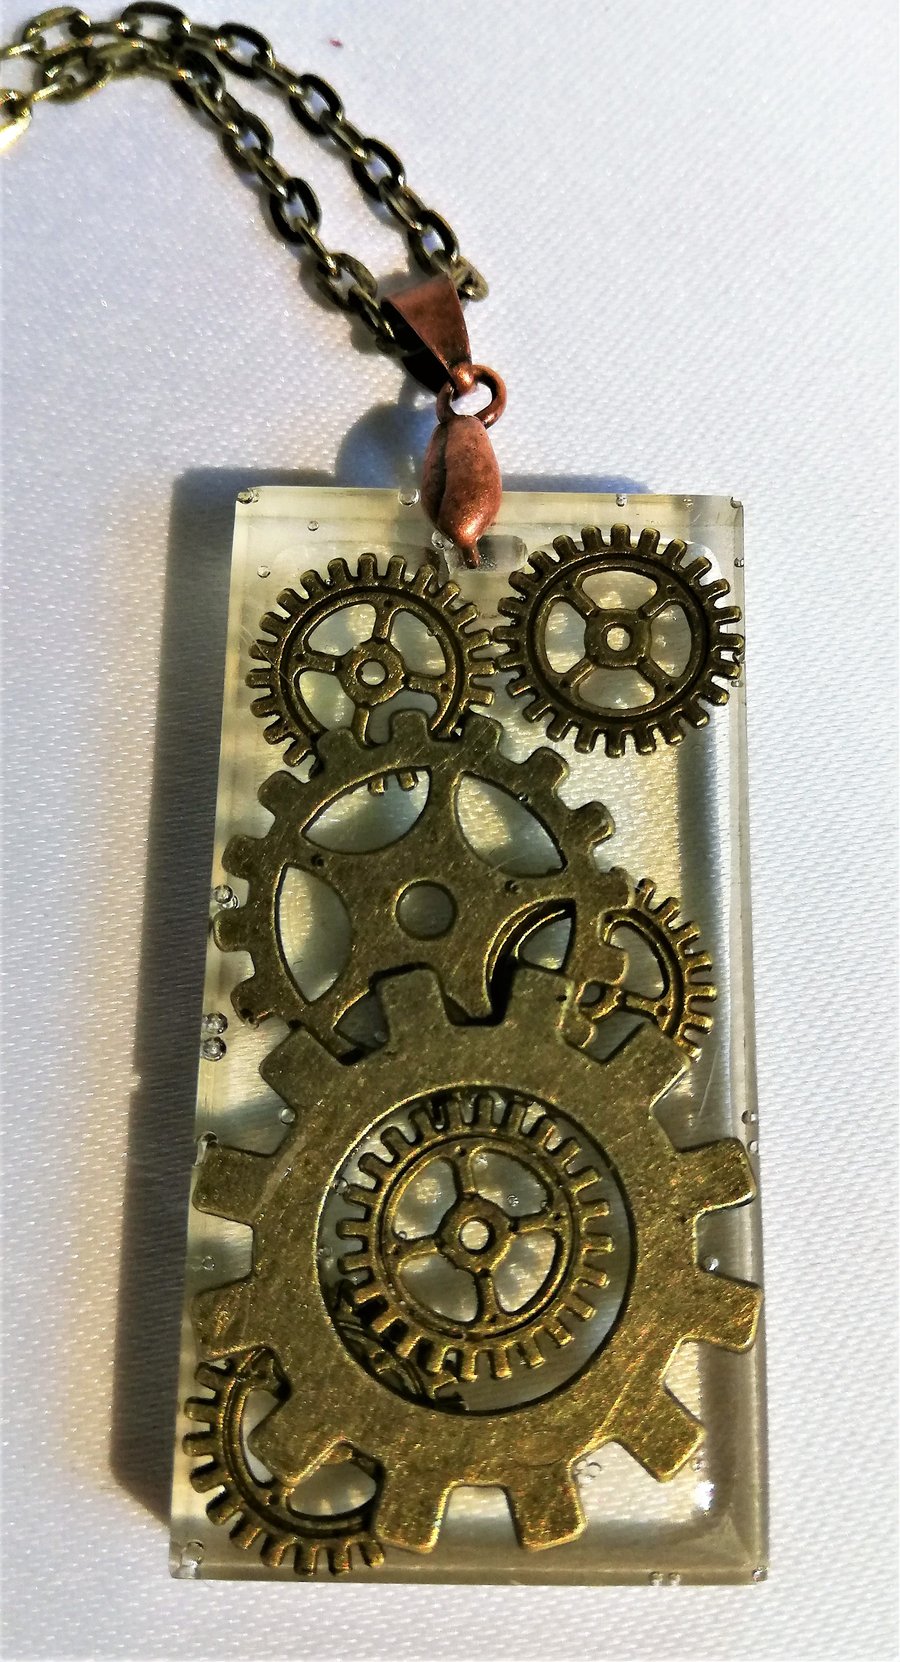 Handmade steampunk resin necklace with bronze cogs and gears